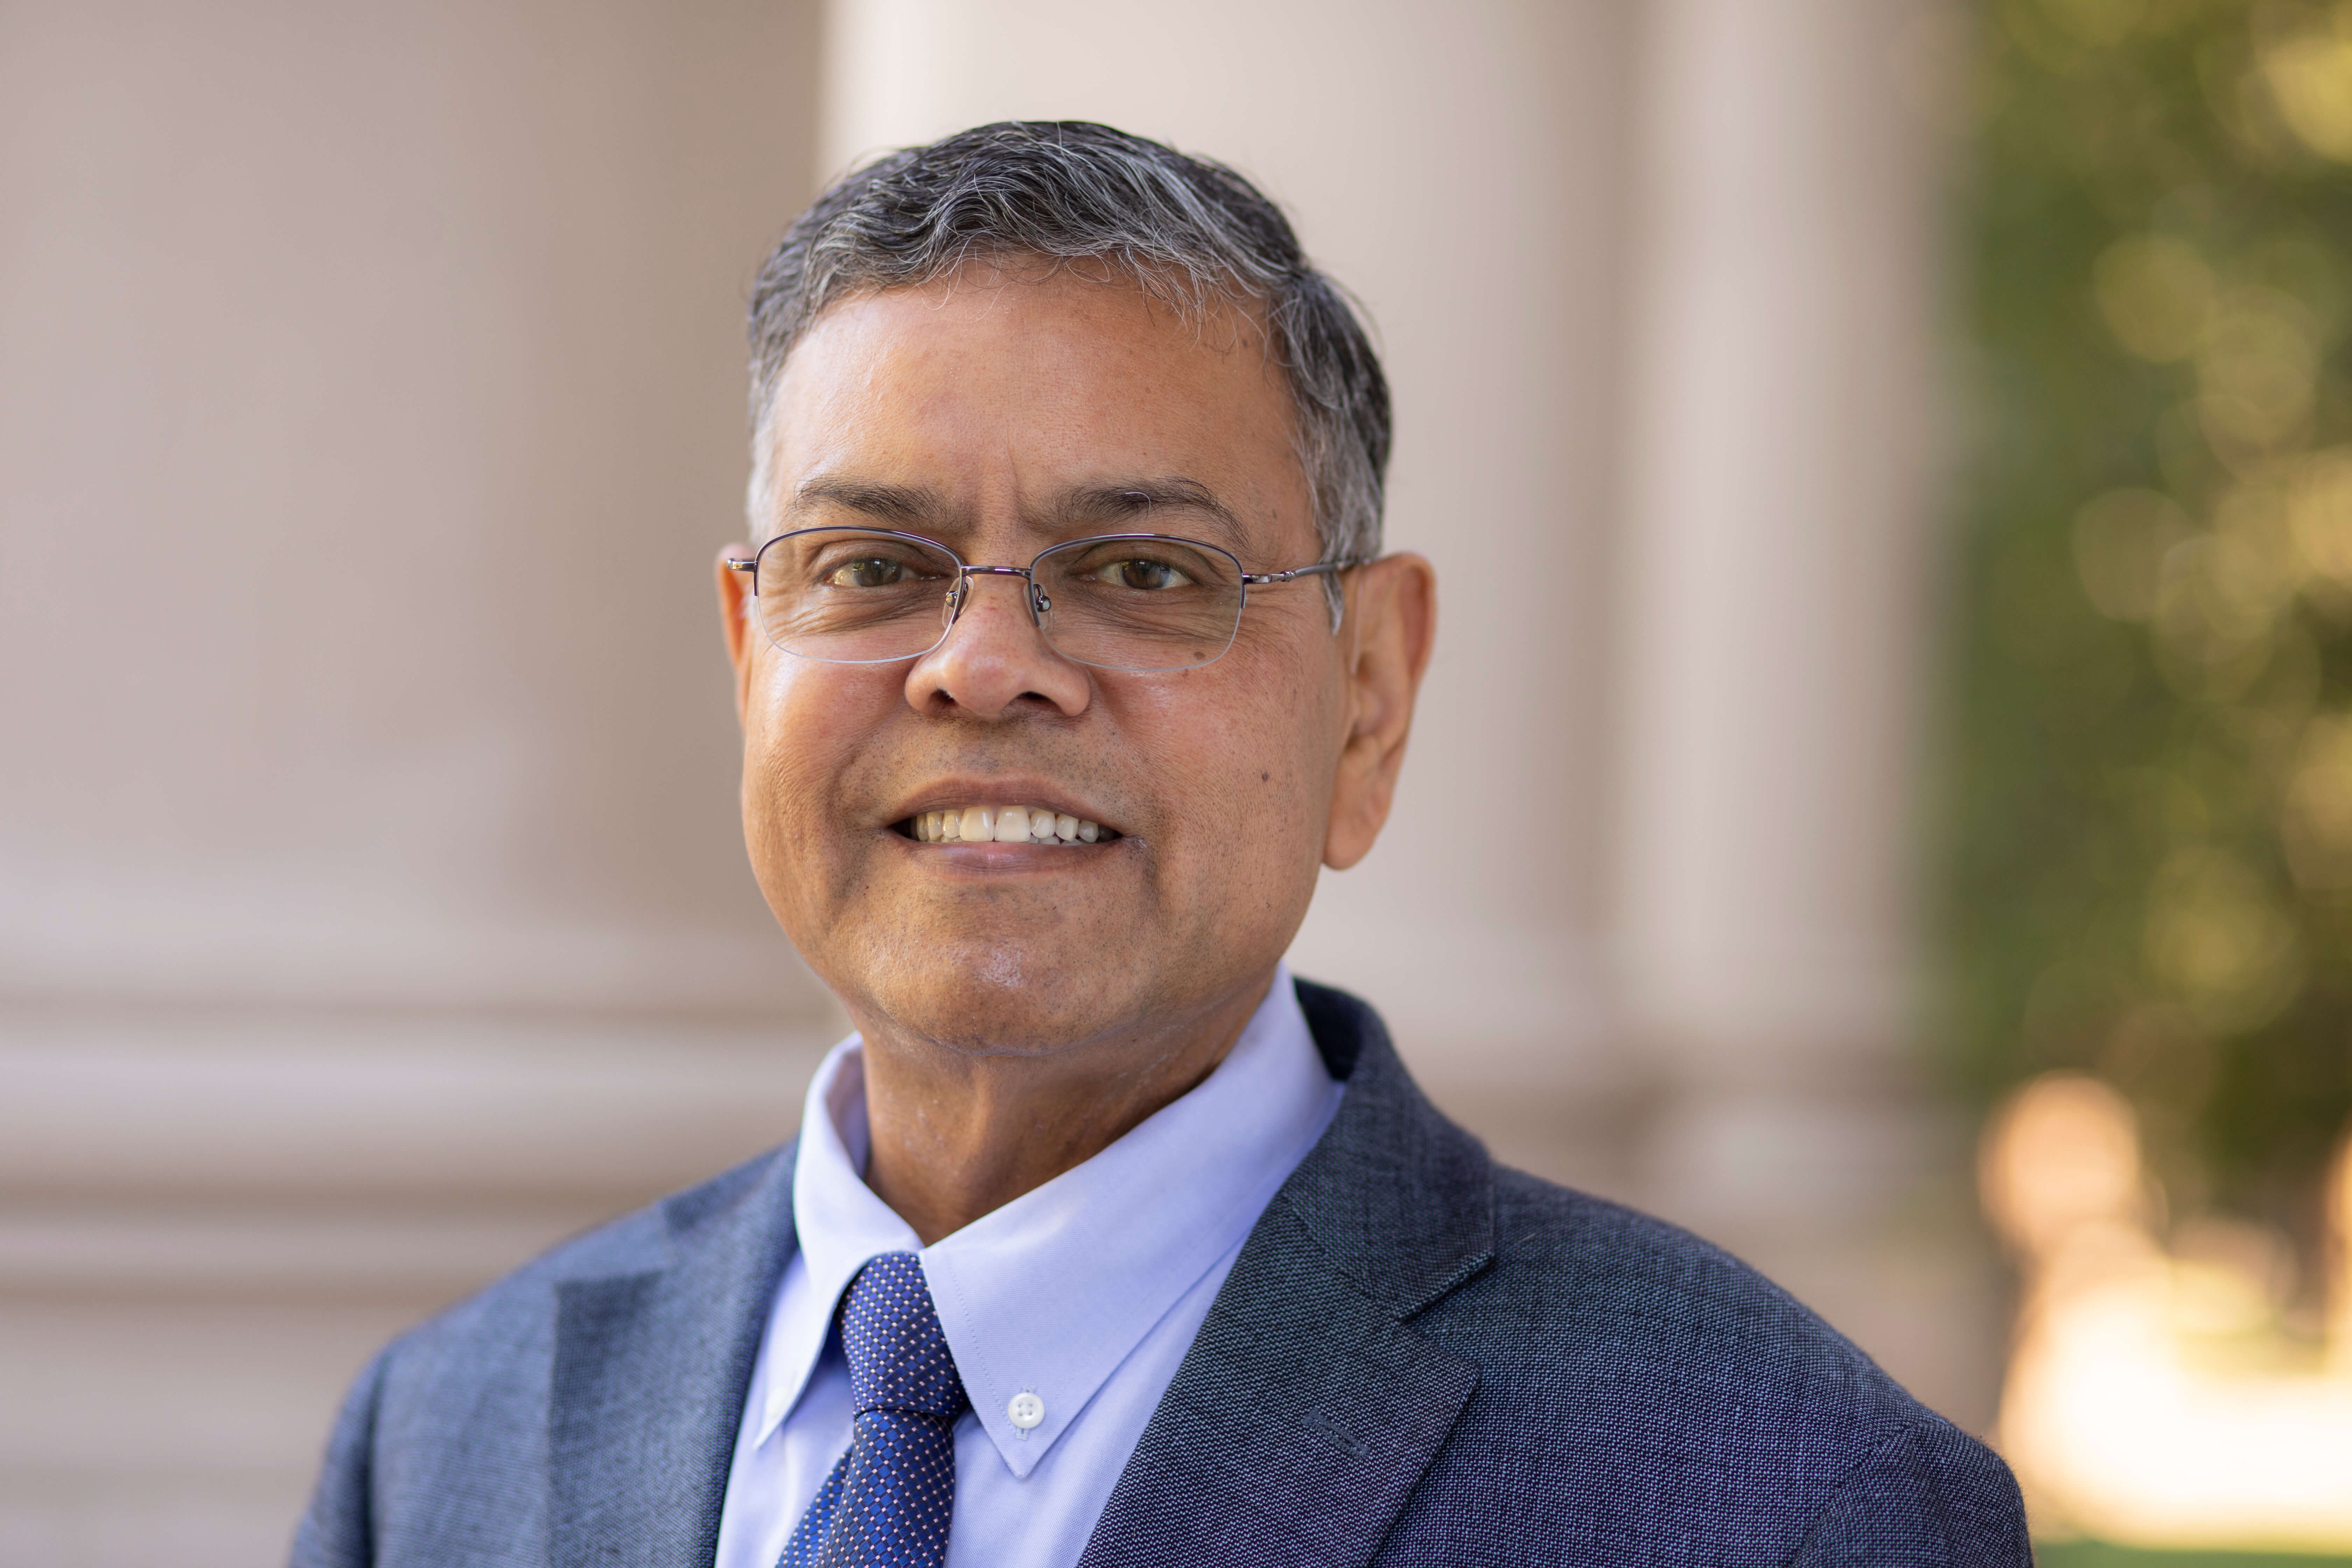 Headshot of Dean Raj Devasagayam standing in front of the Great Hall at Monmouth University